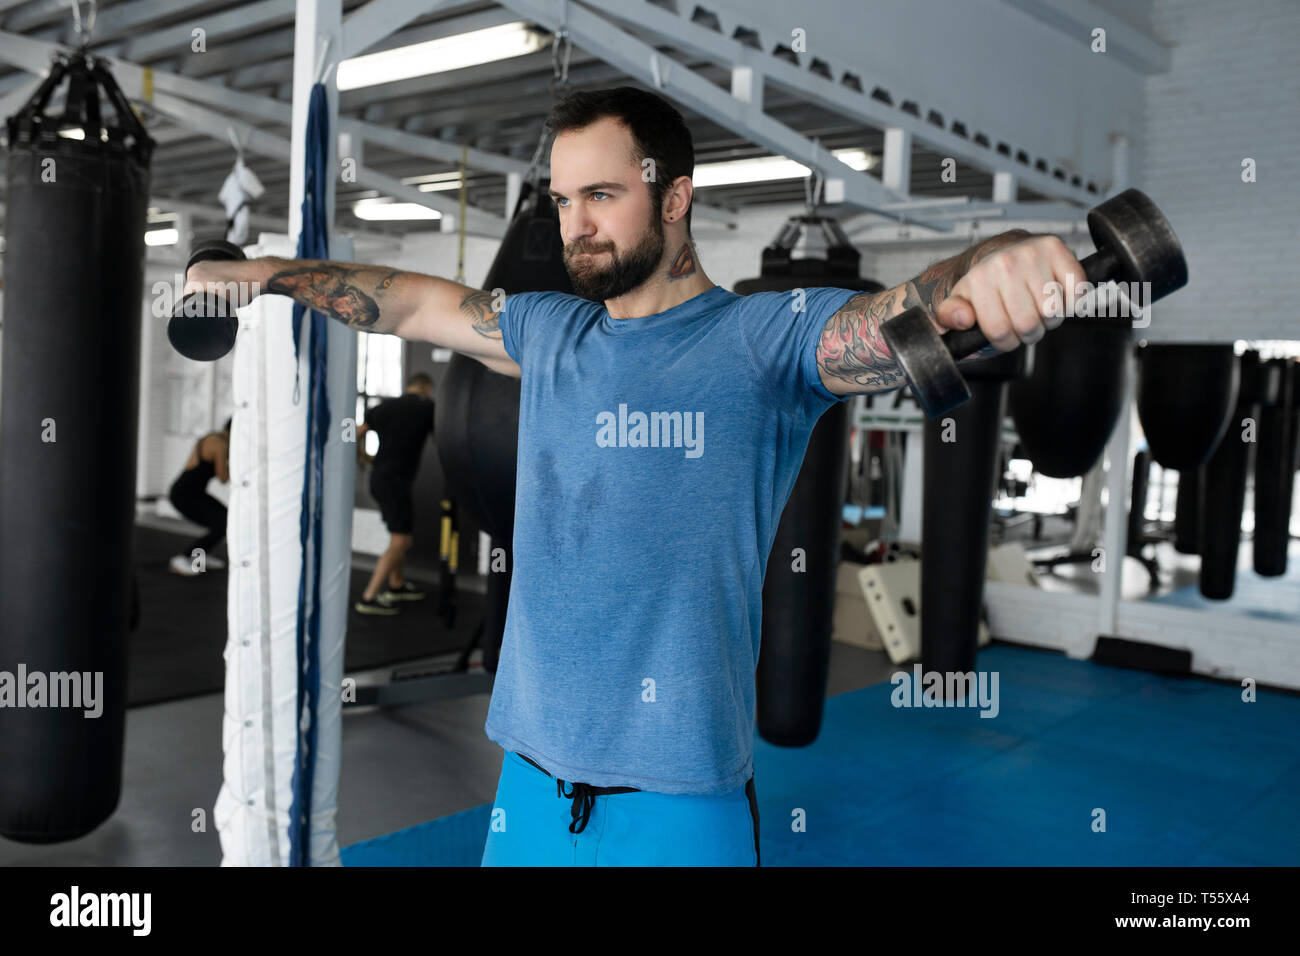 Mid adult man lifting dumbbells in gym Stock Photo